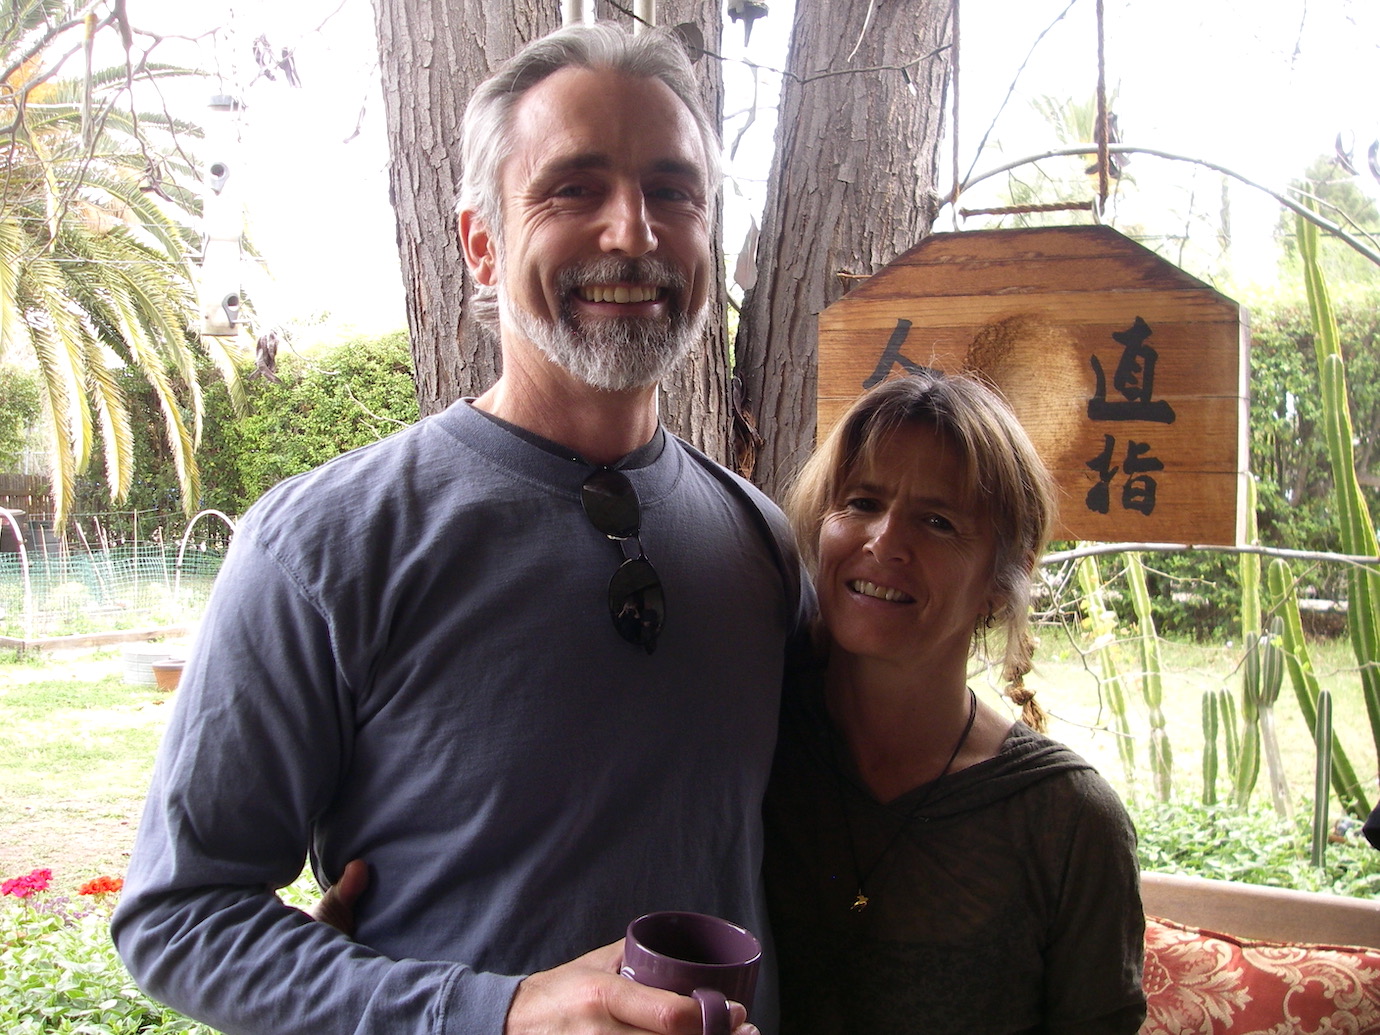 Don and I at the Tempe, AZ Zen Center glowing after a long meditation retreat